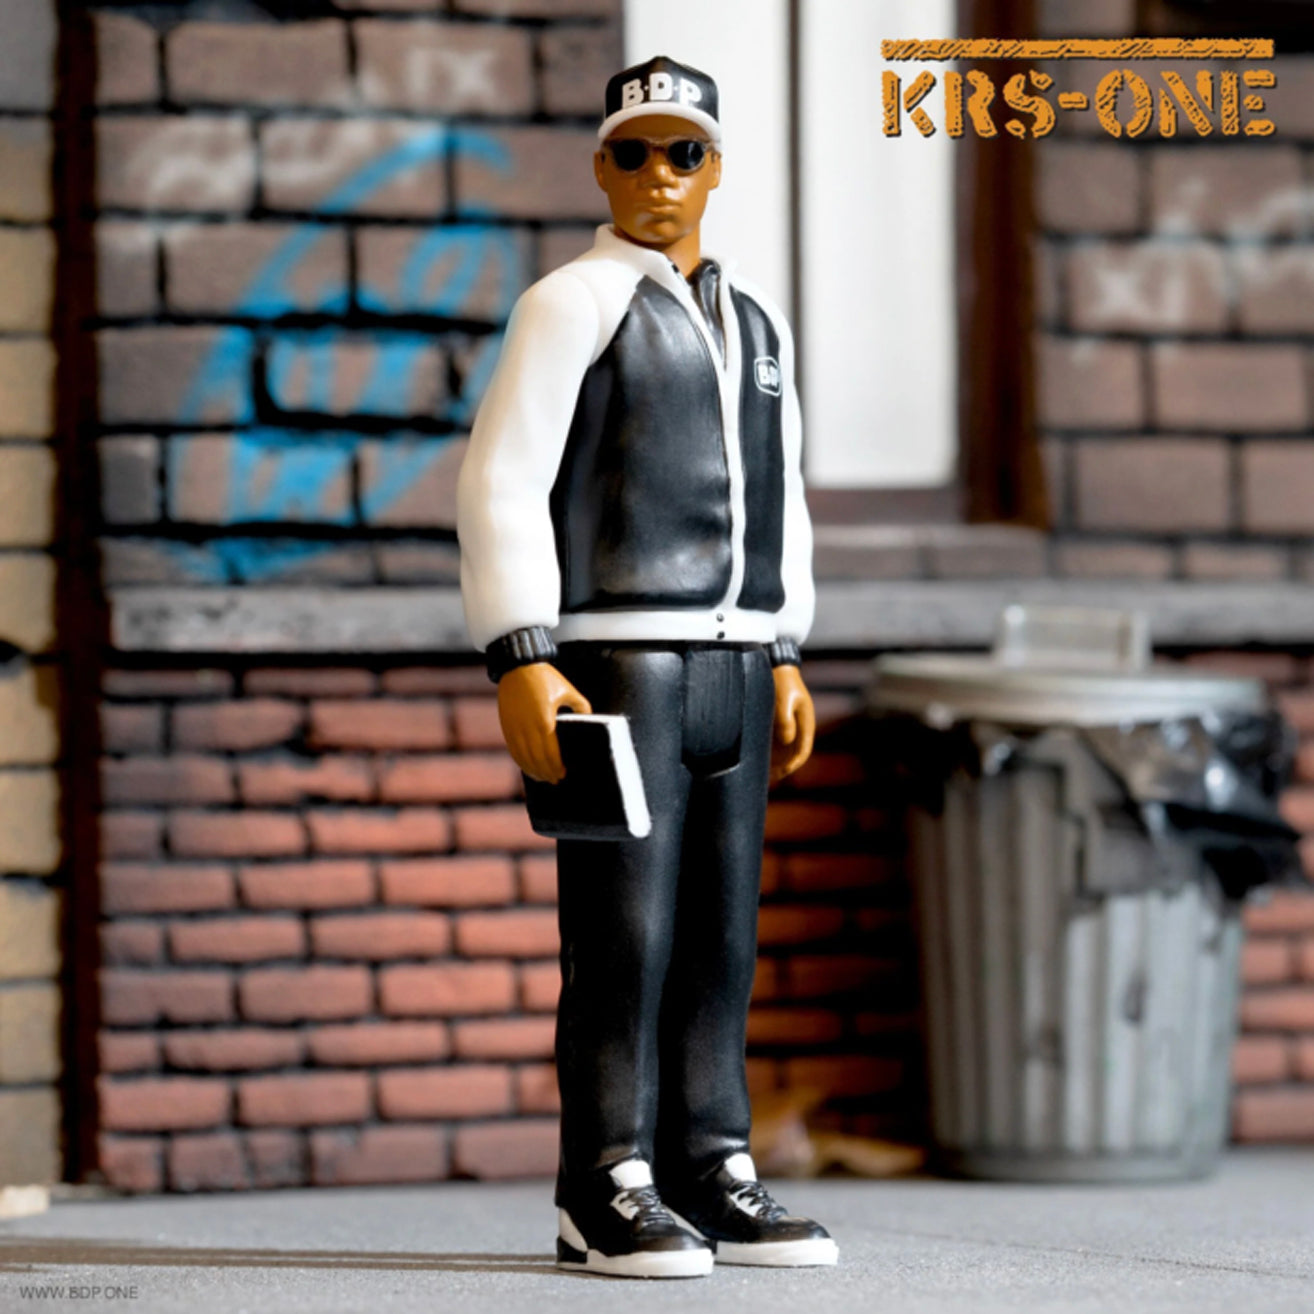 Super7 / 3.75" KRS-One - By All Means Necessary ReAction figure